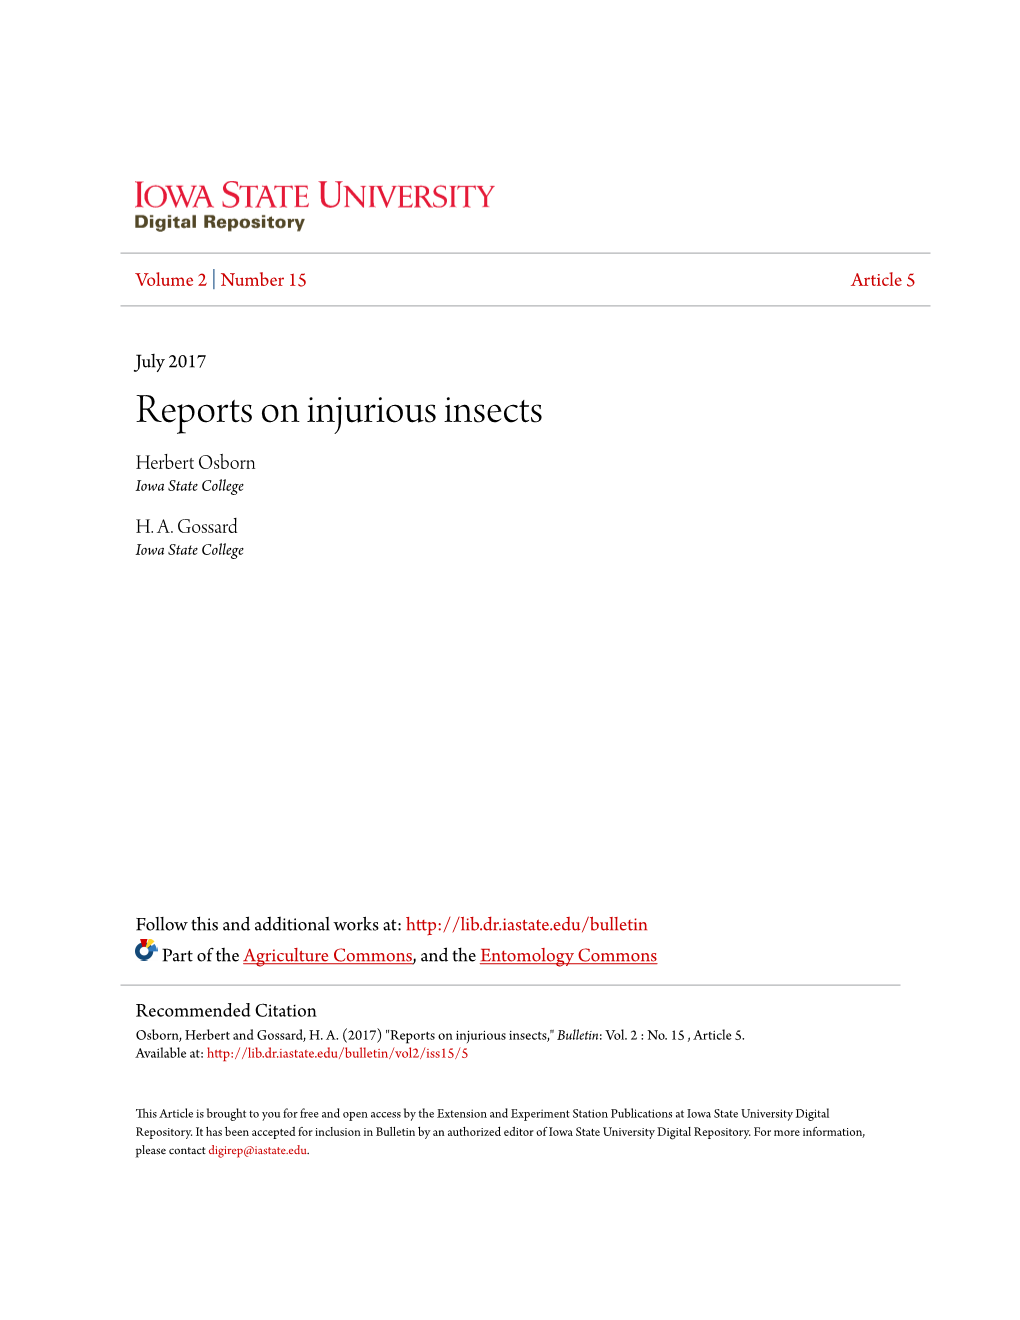 Reports on Injurious Insects Herbert Osborn Iowa State College